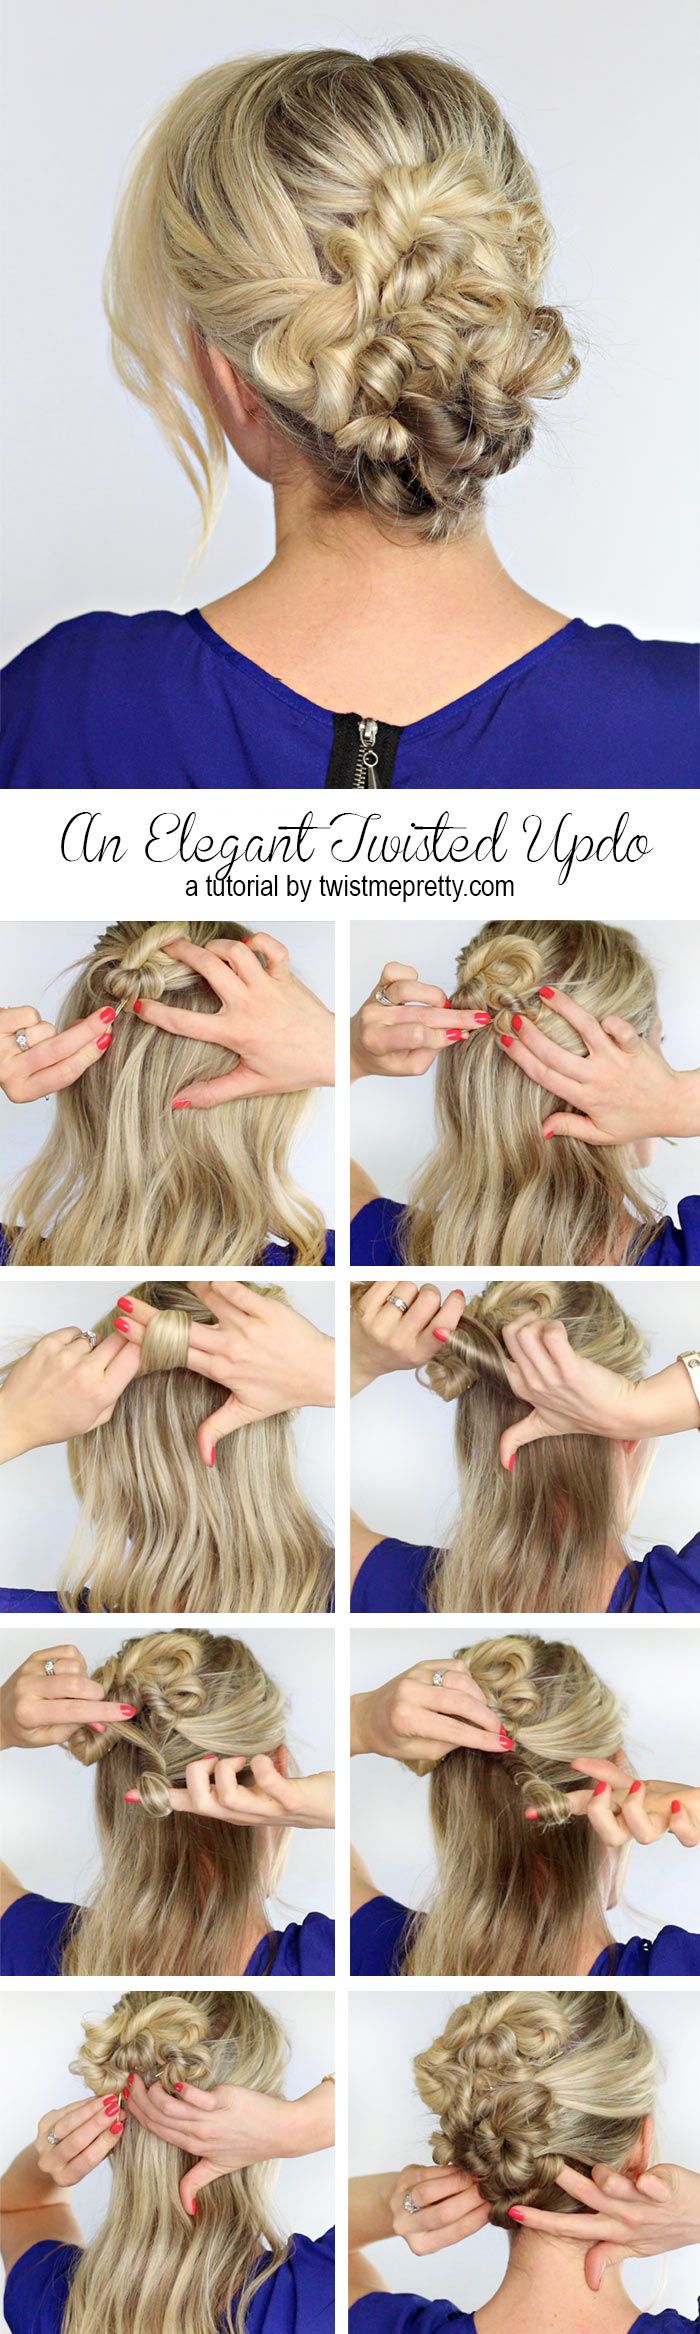 Long Hairstyles for Girls Step By Step Tutorial & Trends with Pictures (20)